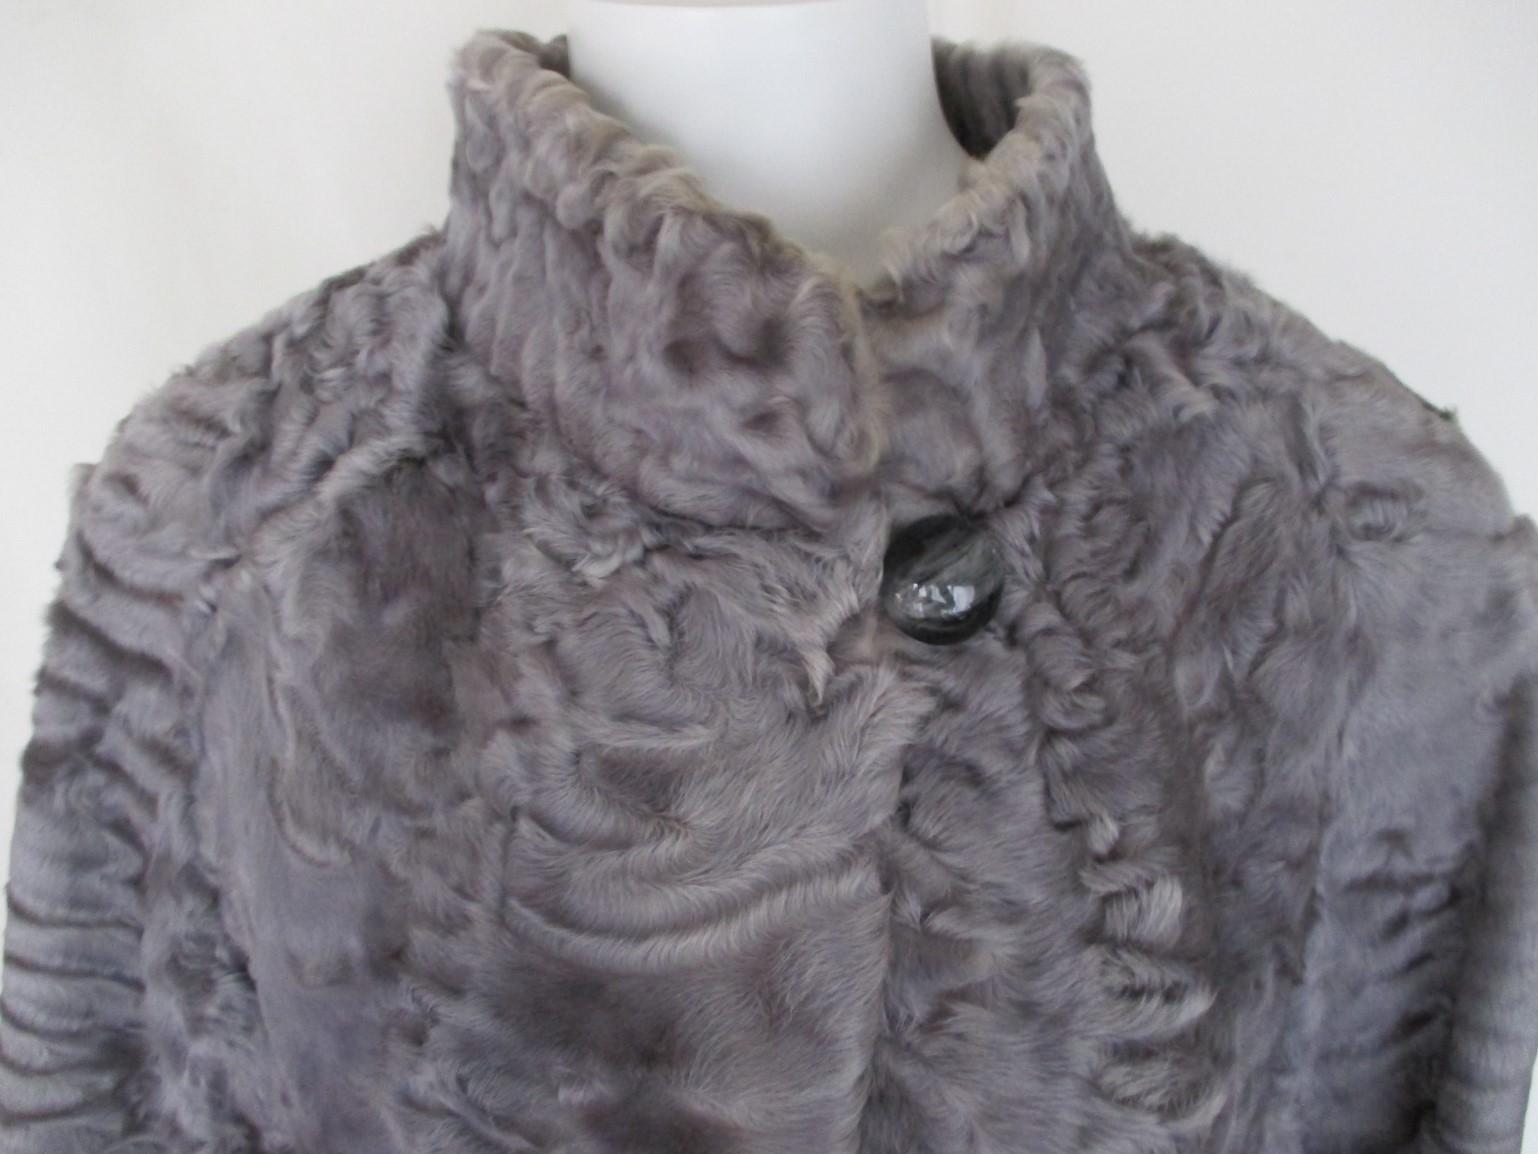 This coat has 2 pockets, 1 button at the collar, 3 closing hooks.
Broadtail fur is is the highest valued type of lamb fur.
Color: silver-grey-blue
This fur is soft and has little wear at the lining.
The size is about medium.
Please note that vintage